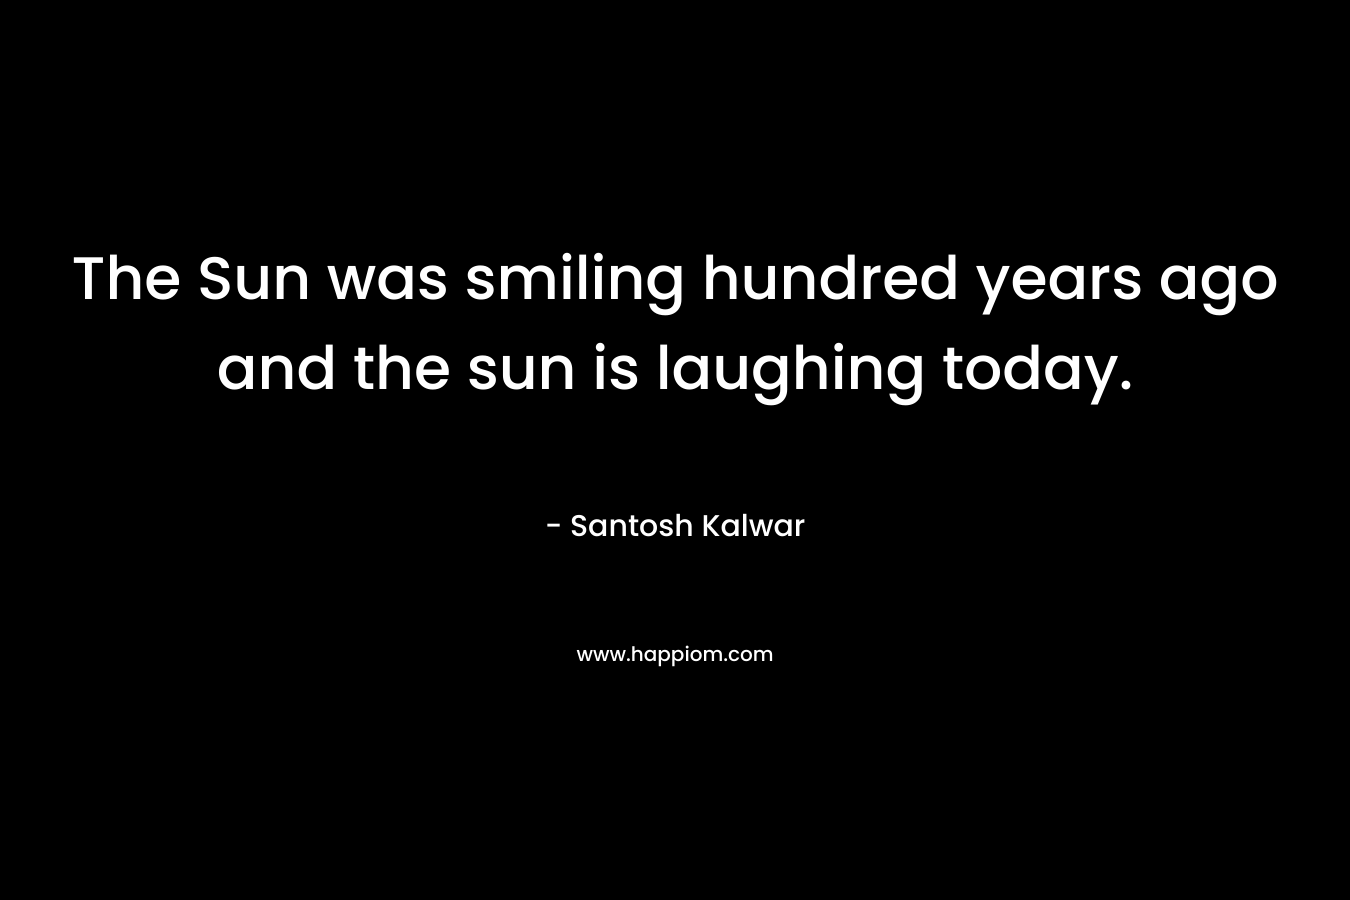 The Sun was smiling hundred years ago and the sun is laughing today. – Santosh Kalwar